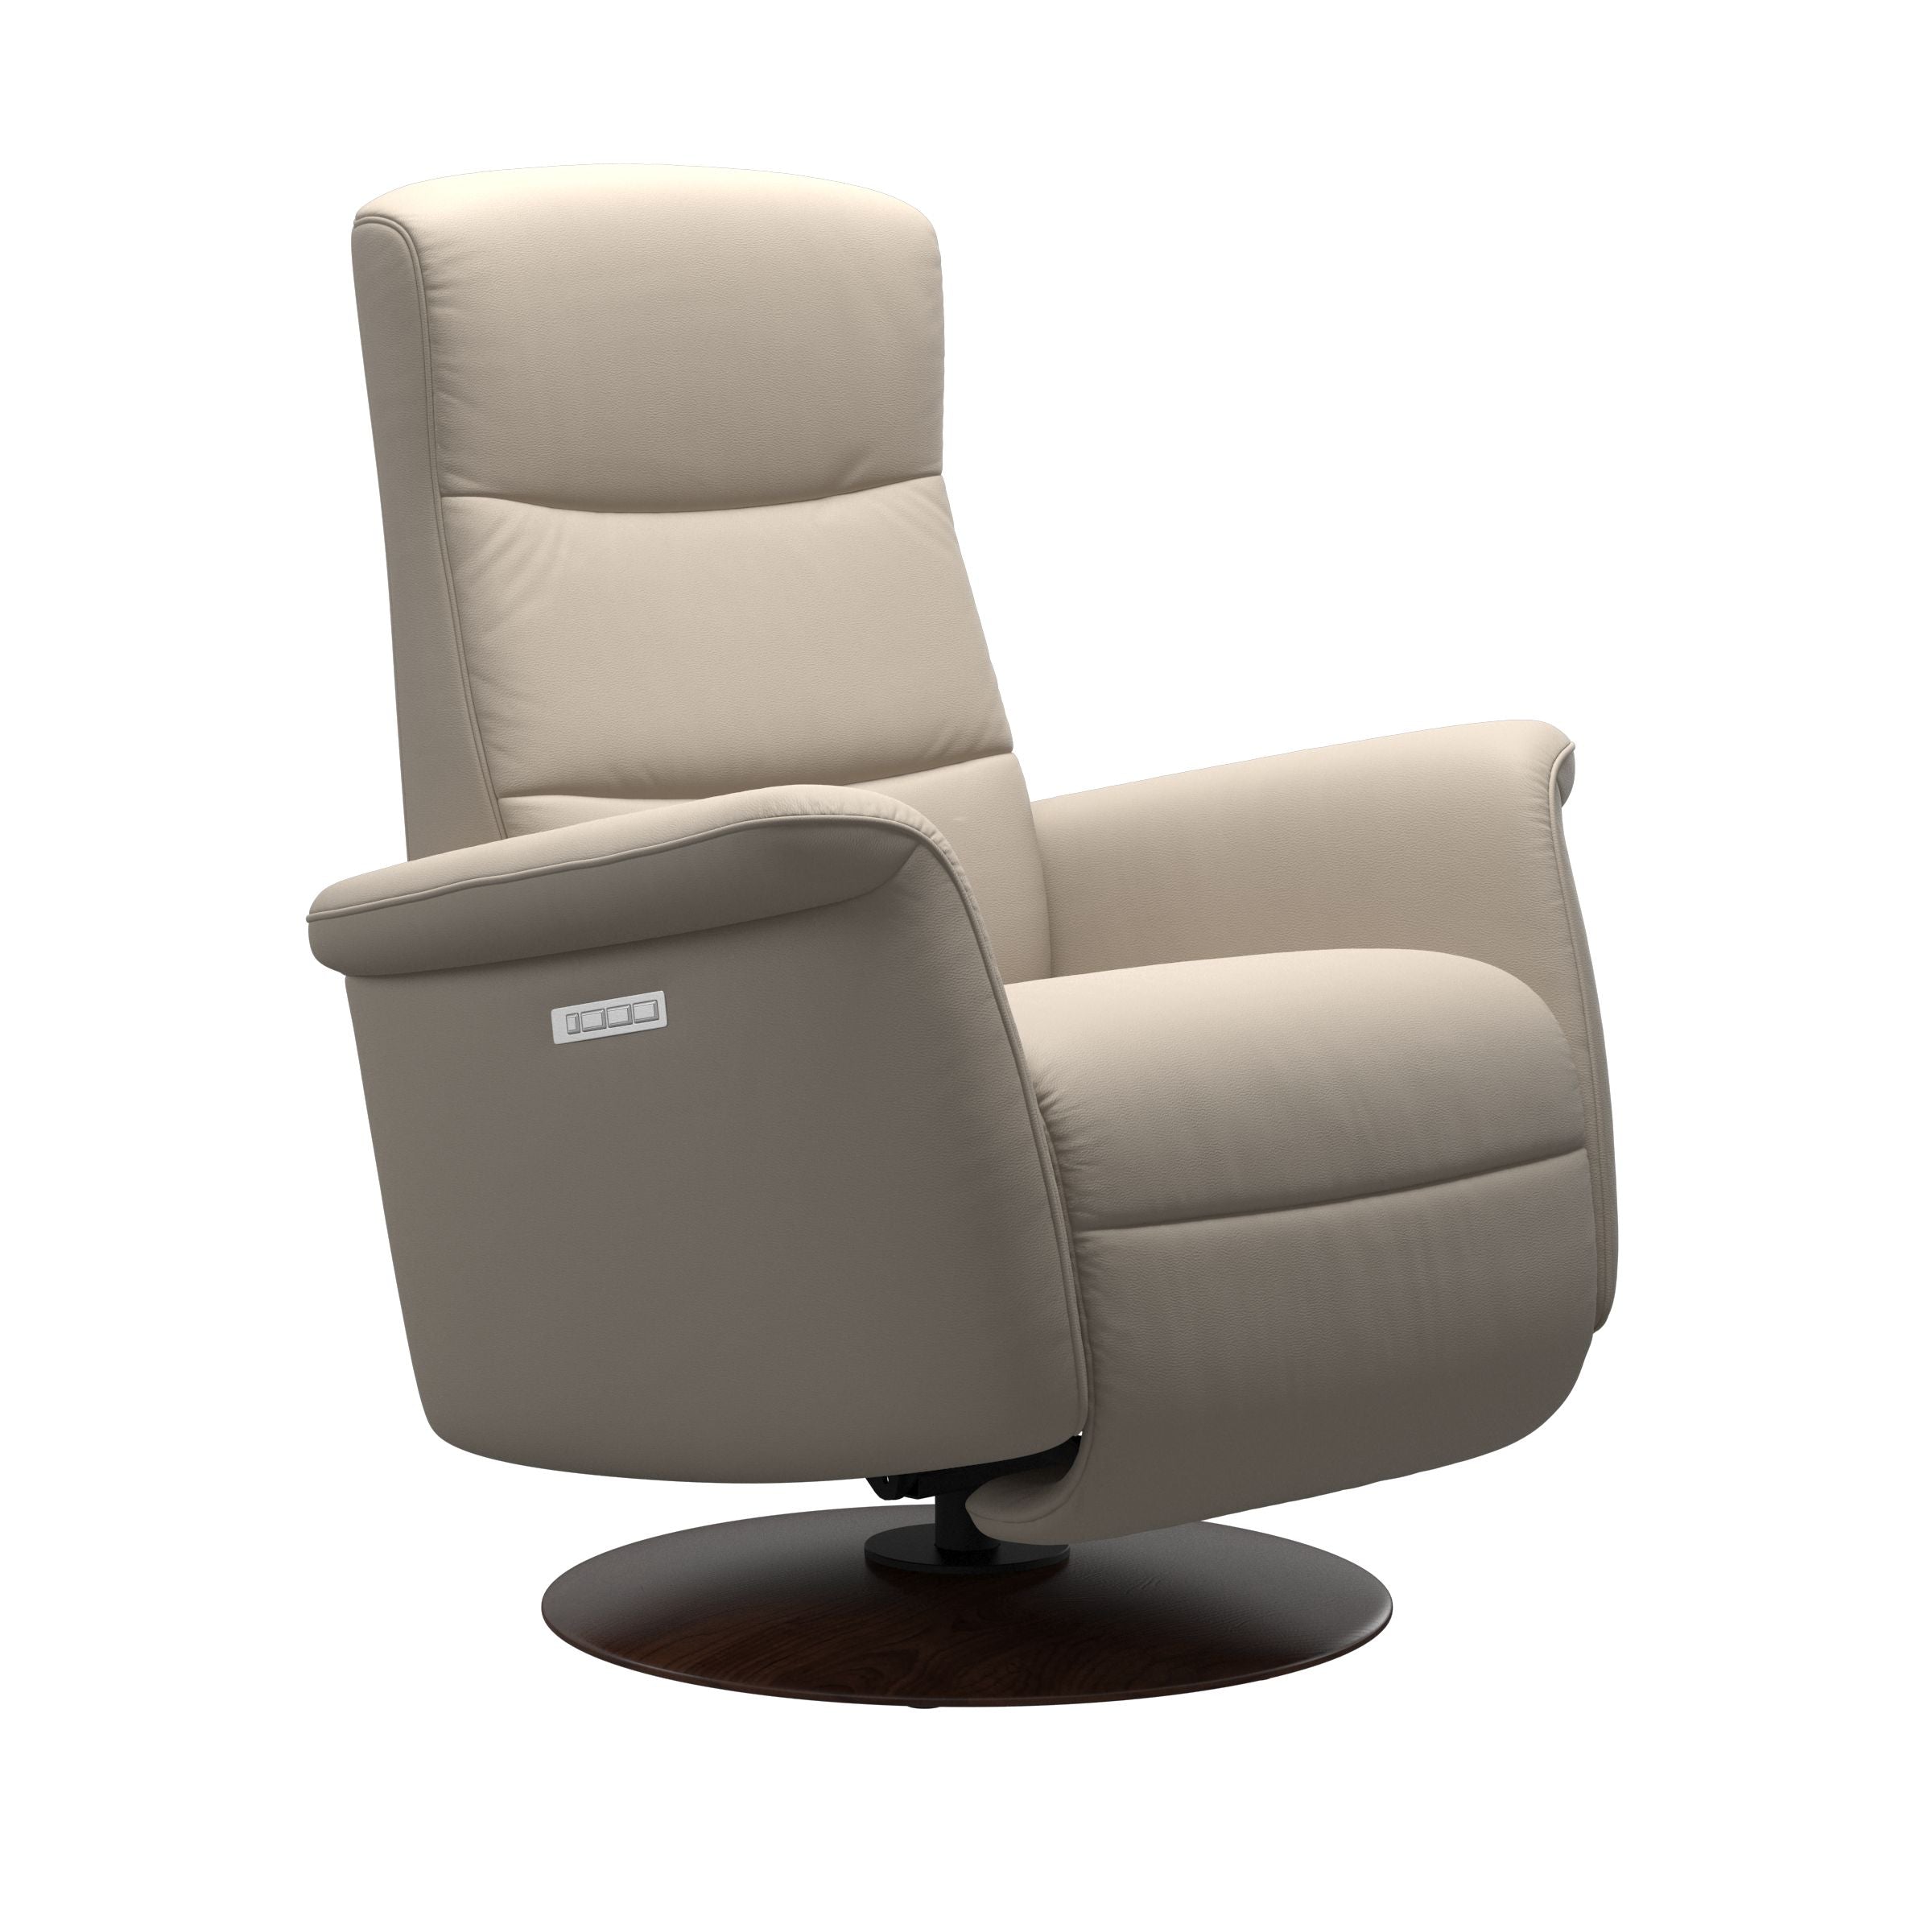 Stressless Mike Small Recliner with Wood Moon Base